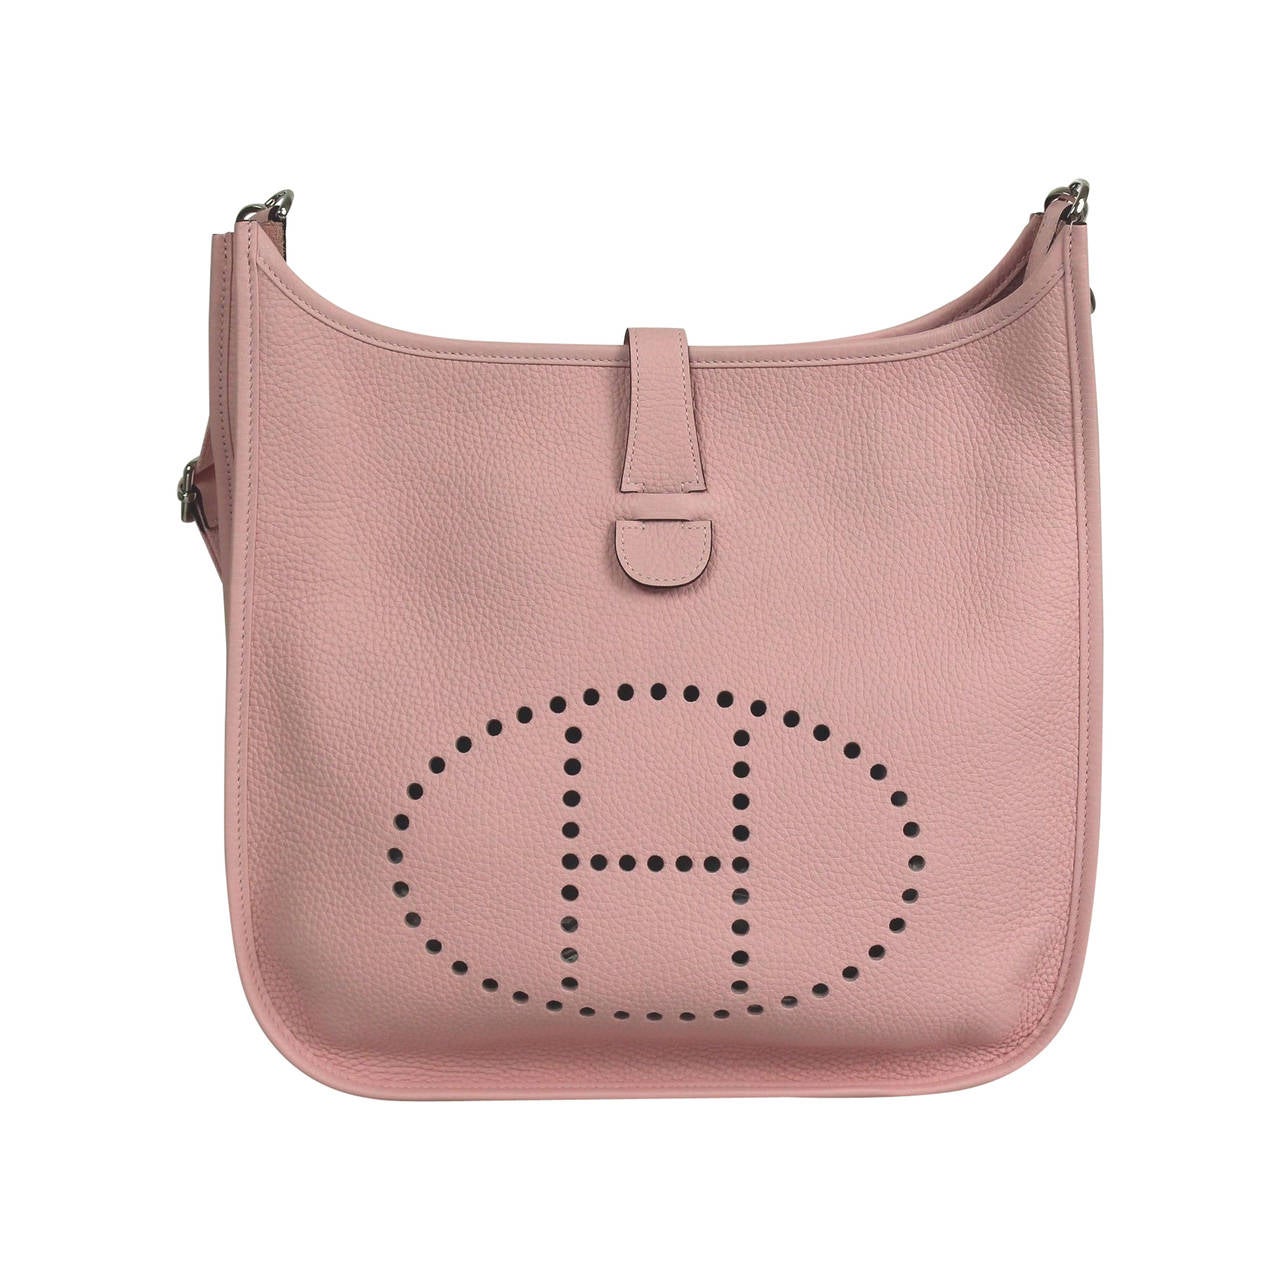 Herms Light Pink Taurillon Clemence Leather Evelyne Iii Gm ...  